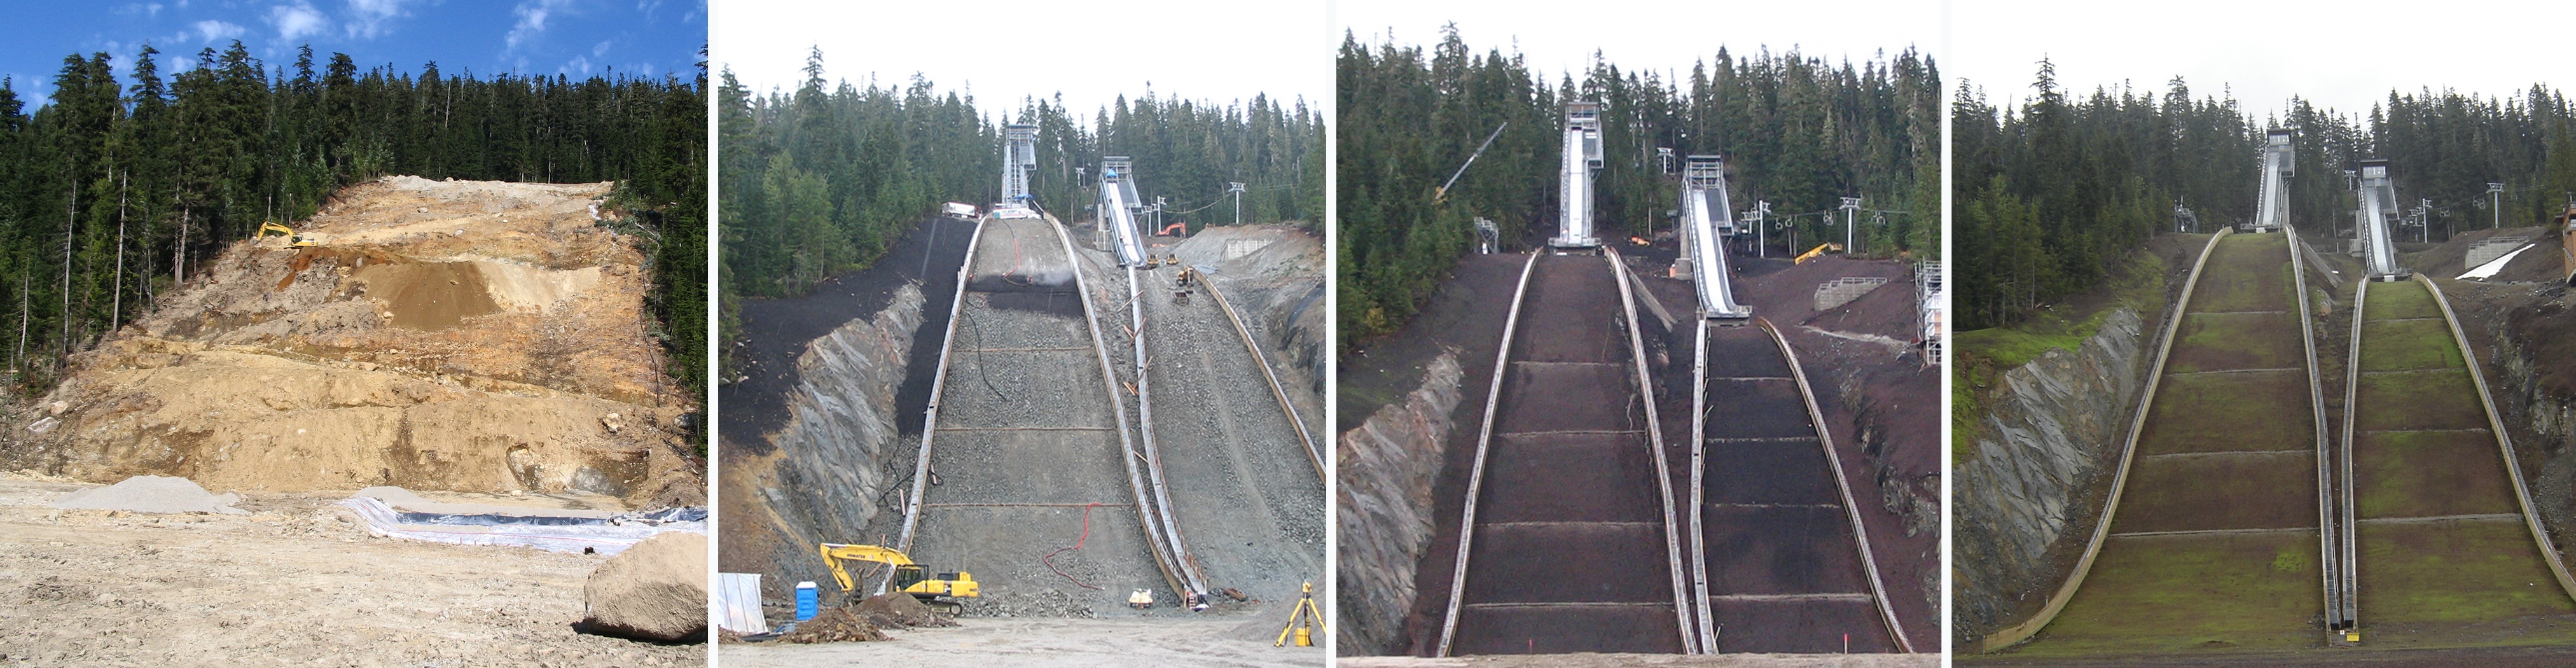 Ski Jump construction for the 2010 Olympics - Looking Back